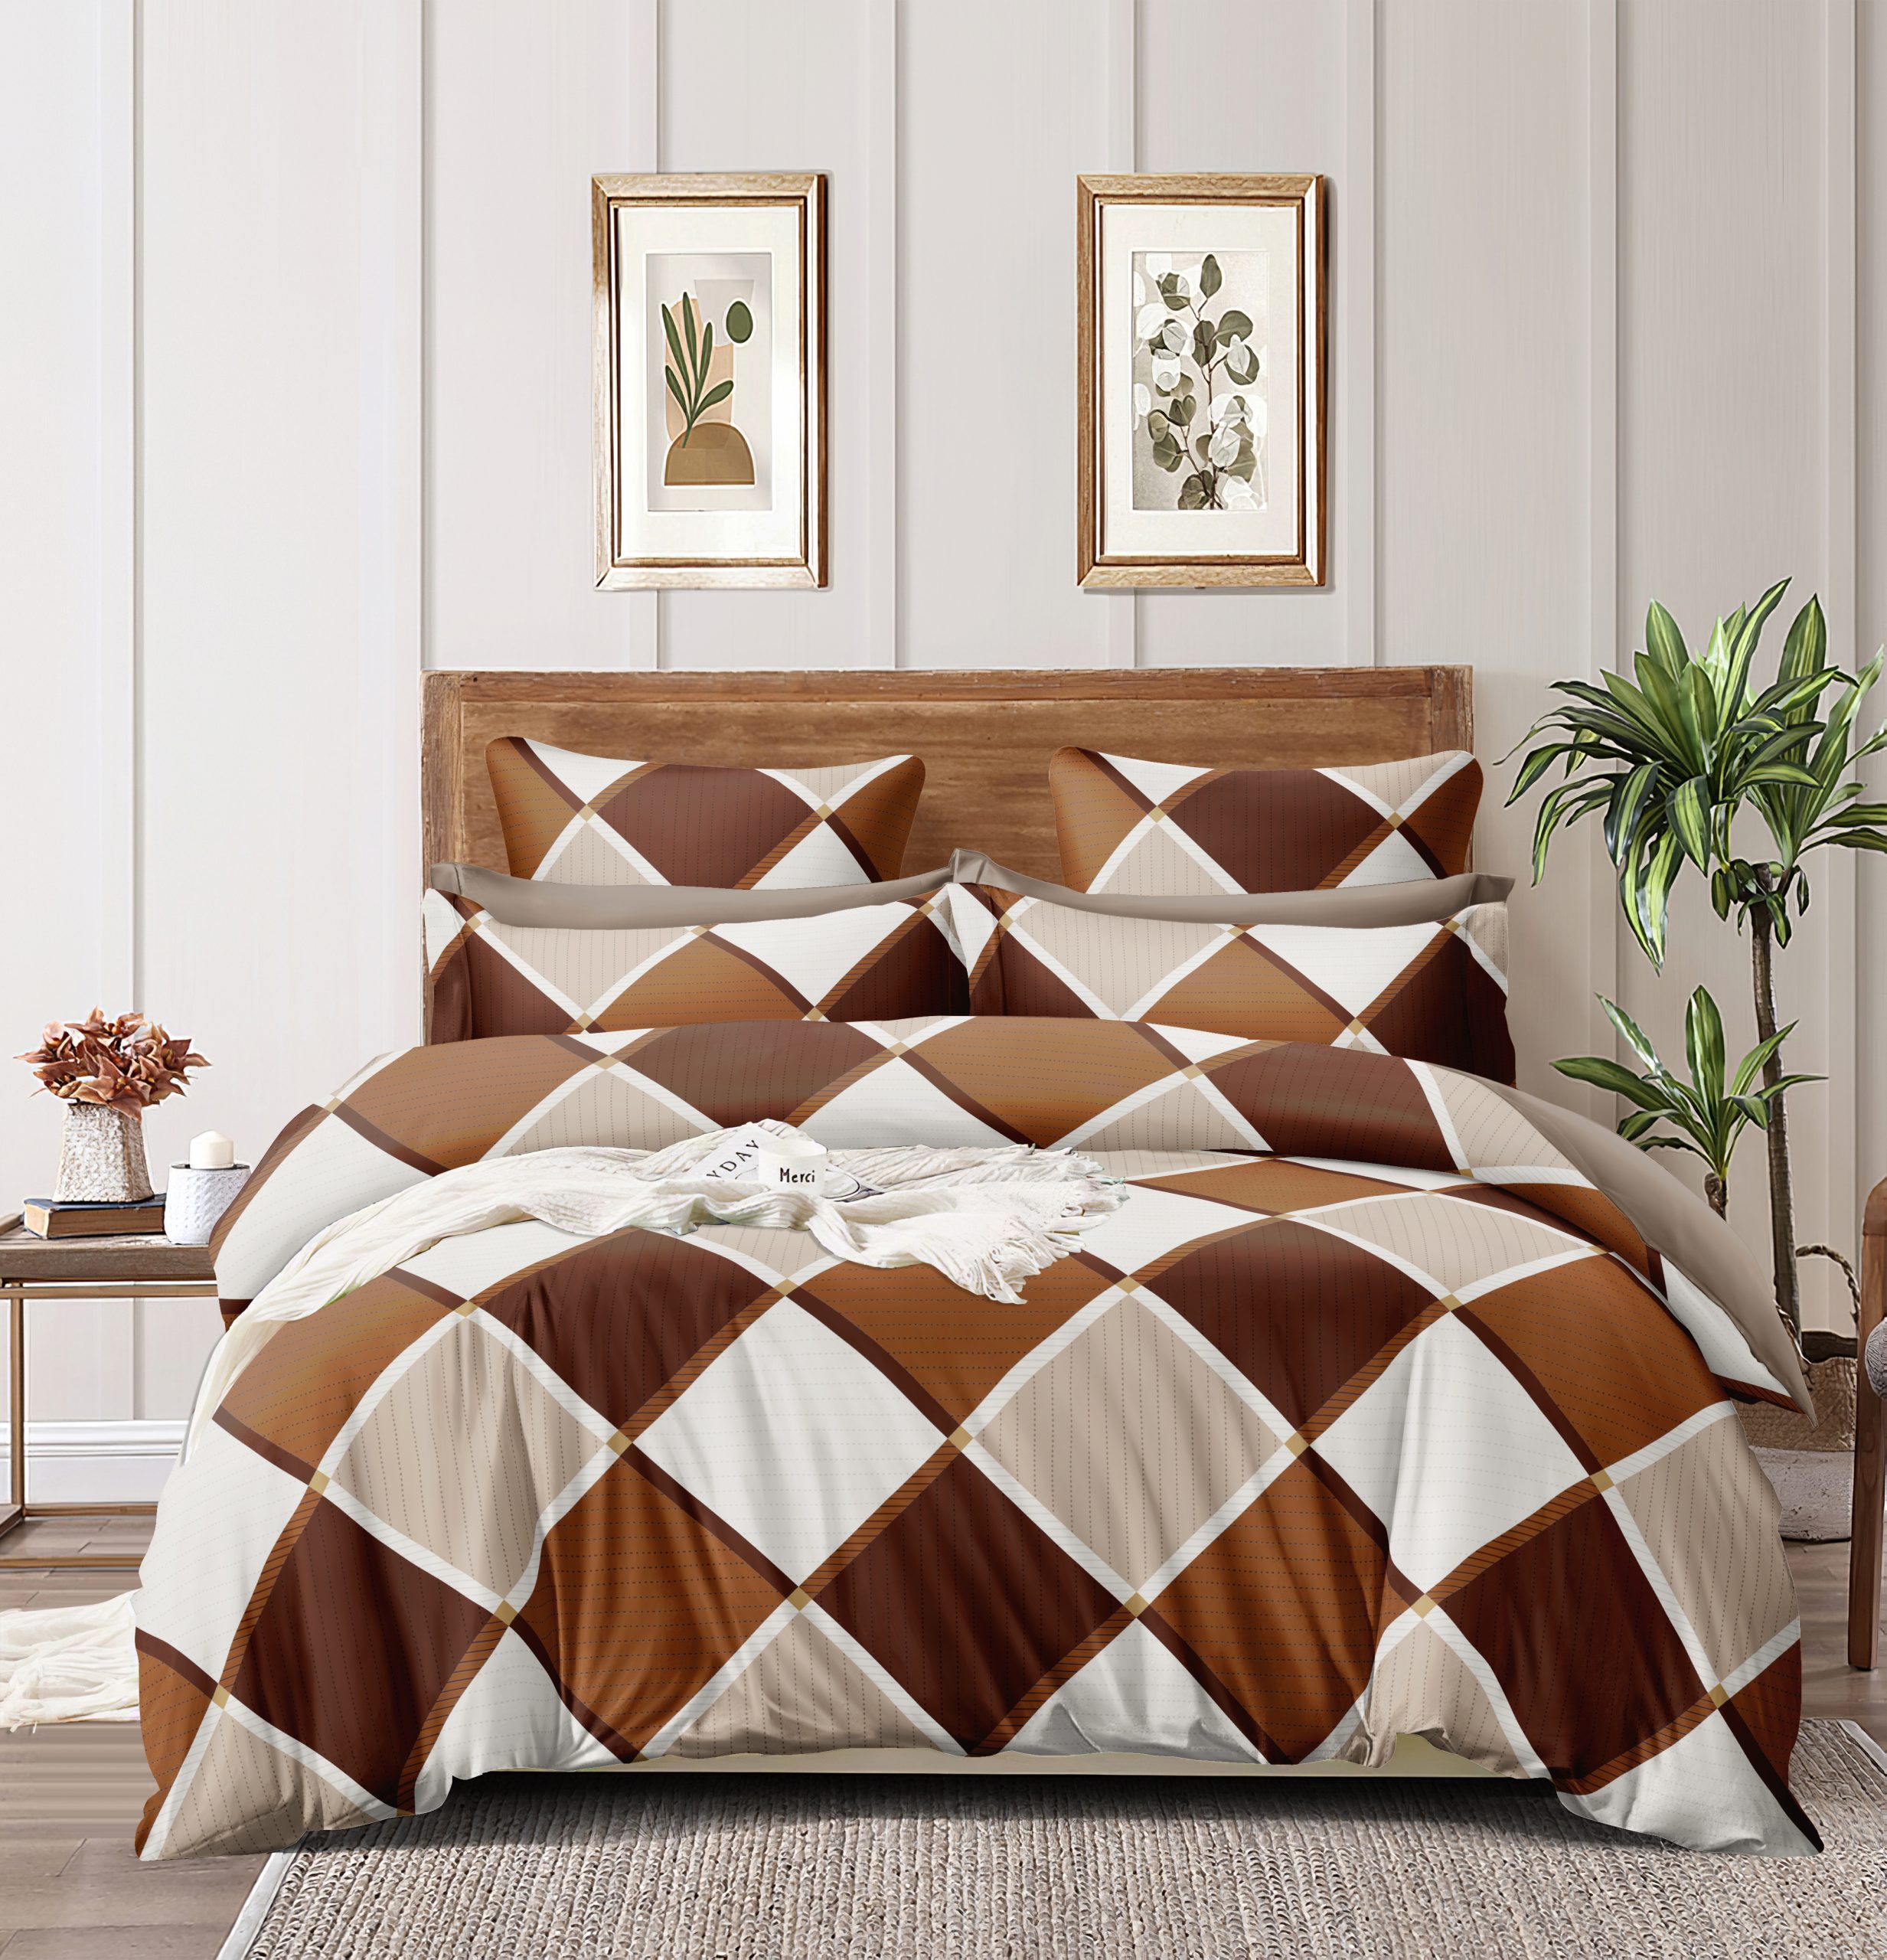 Homewards Checkered Double Bed Comforter in Beige and Brown